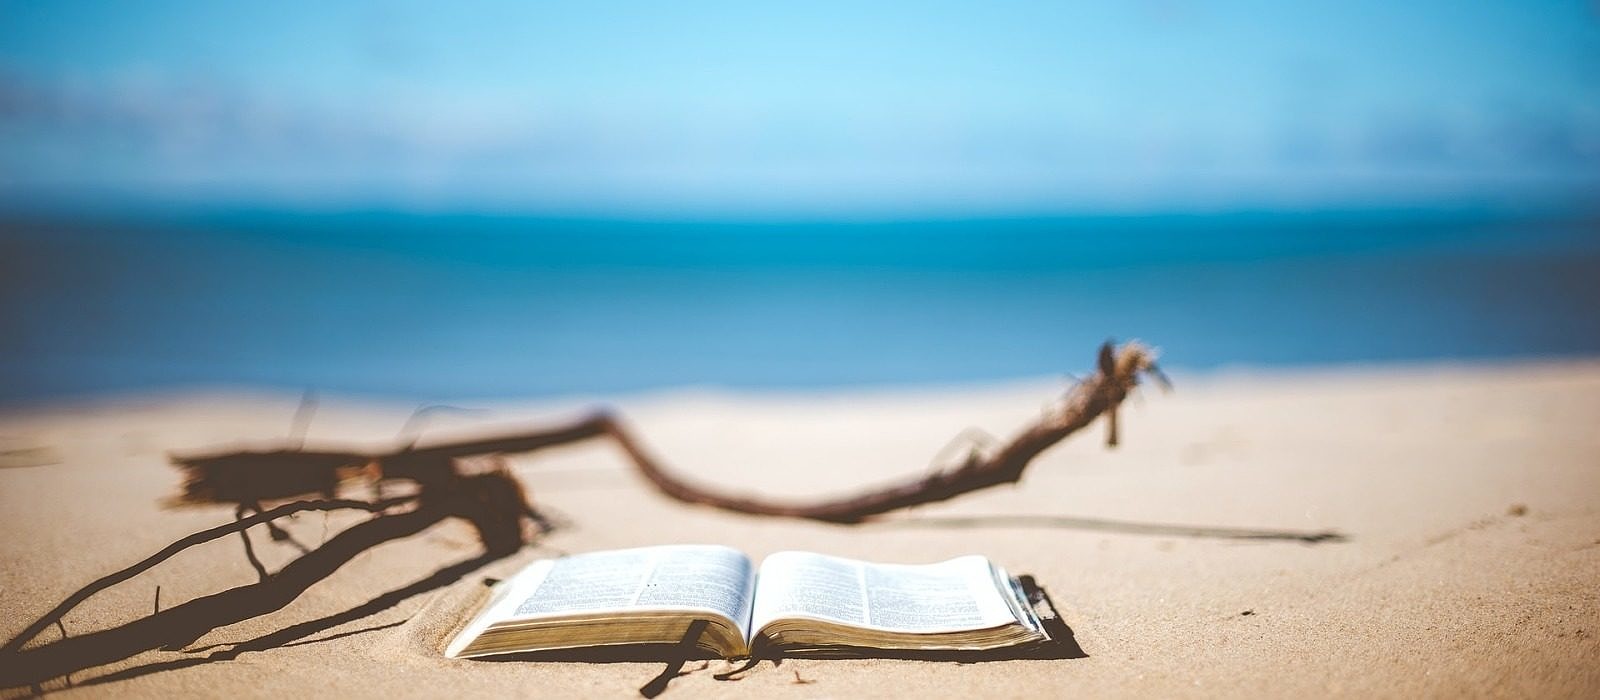 An open book lying on a sandy beach, with driftwood in the foreground and a calm blue ocean in the background. (photo © Ben White via Unsplash)